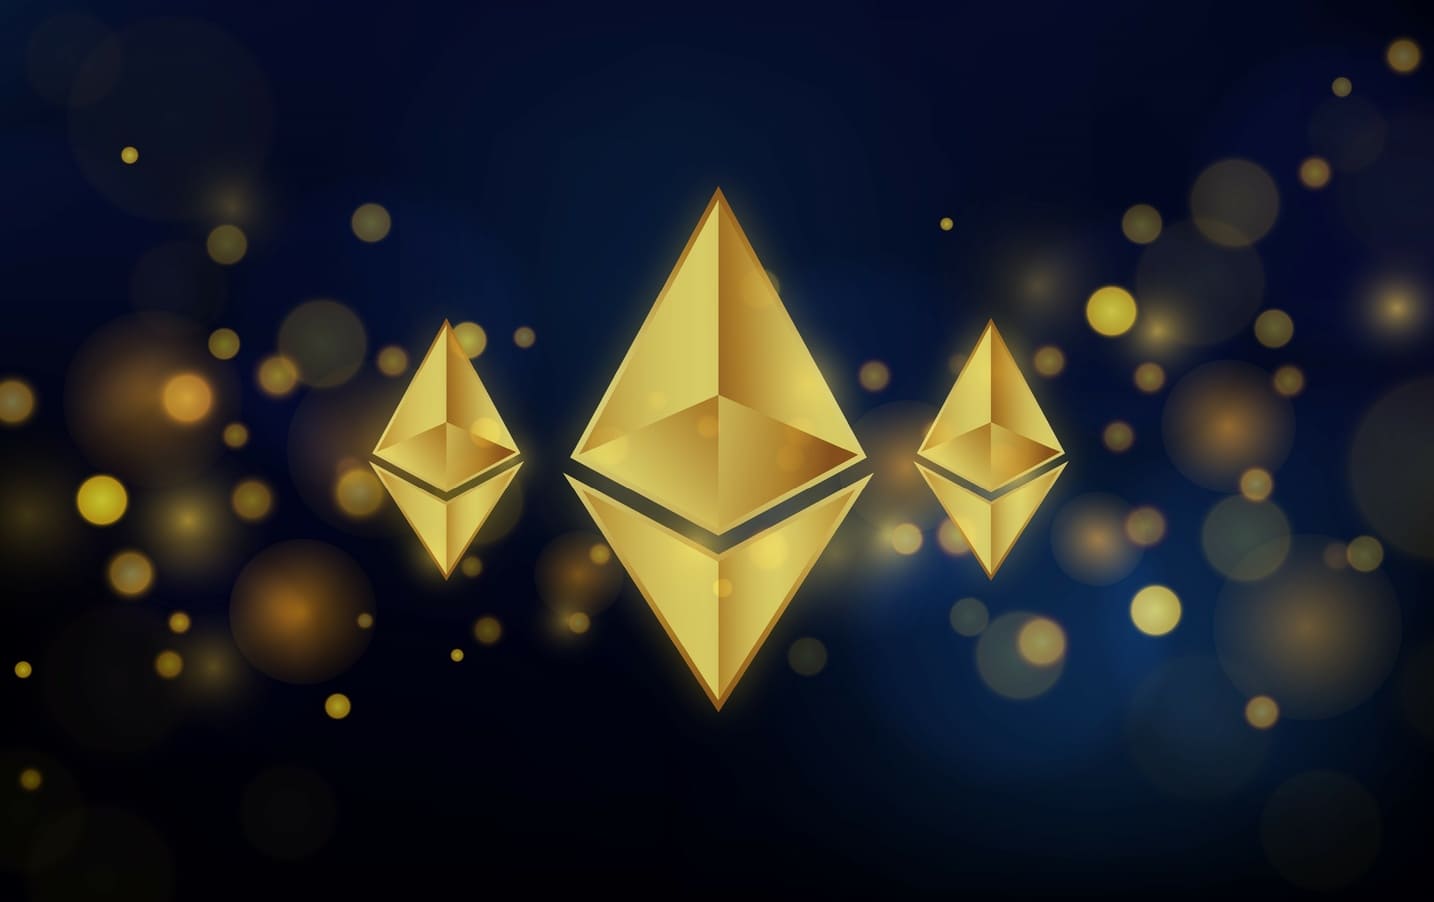 Ethereum’s Merge upgrade has been successfully completed